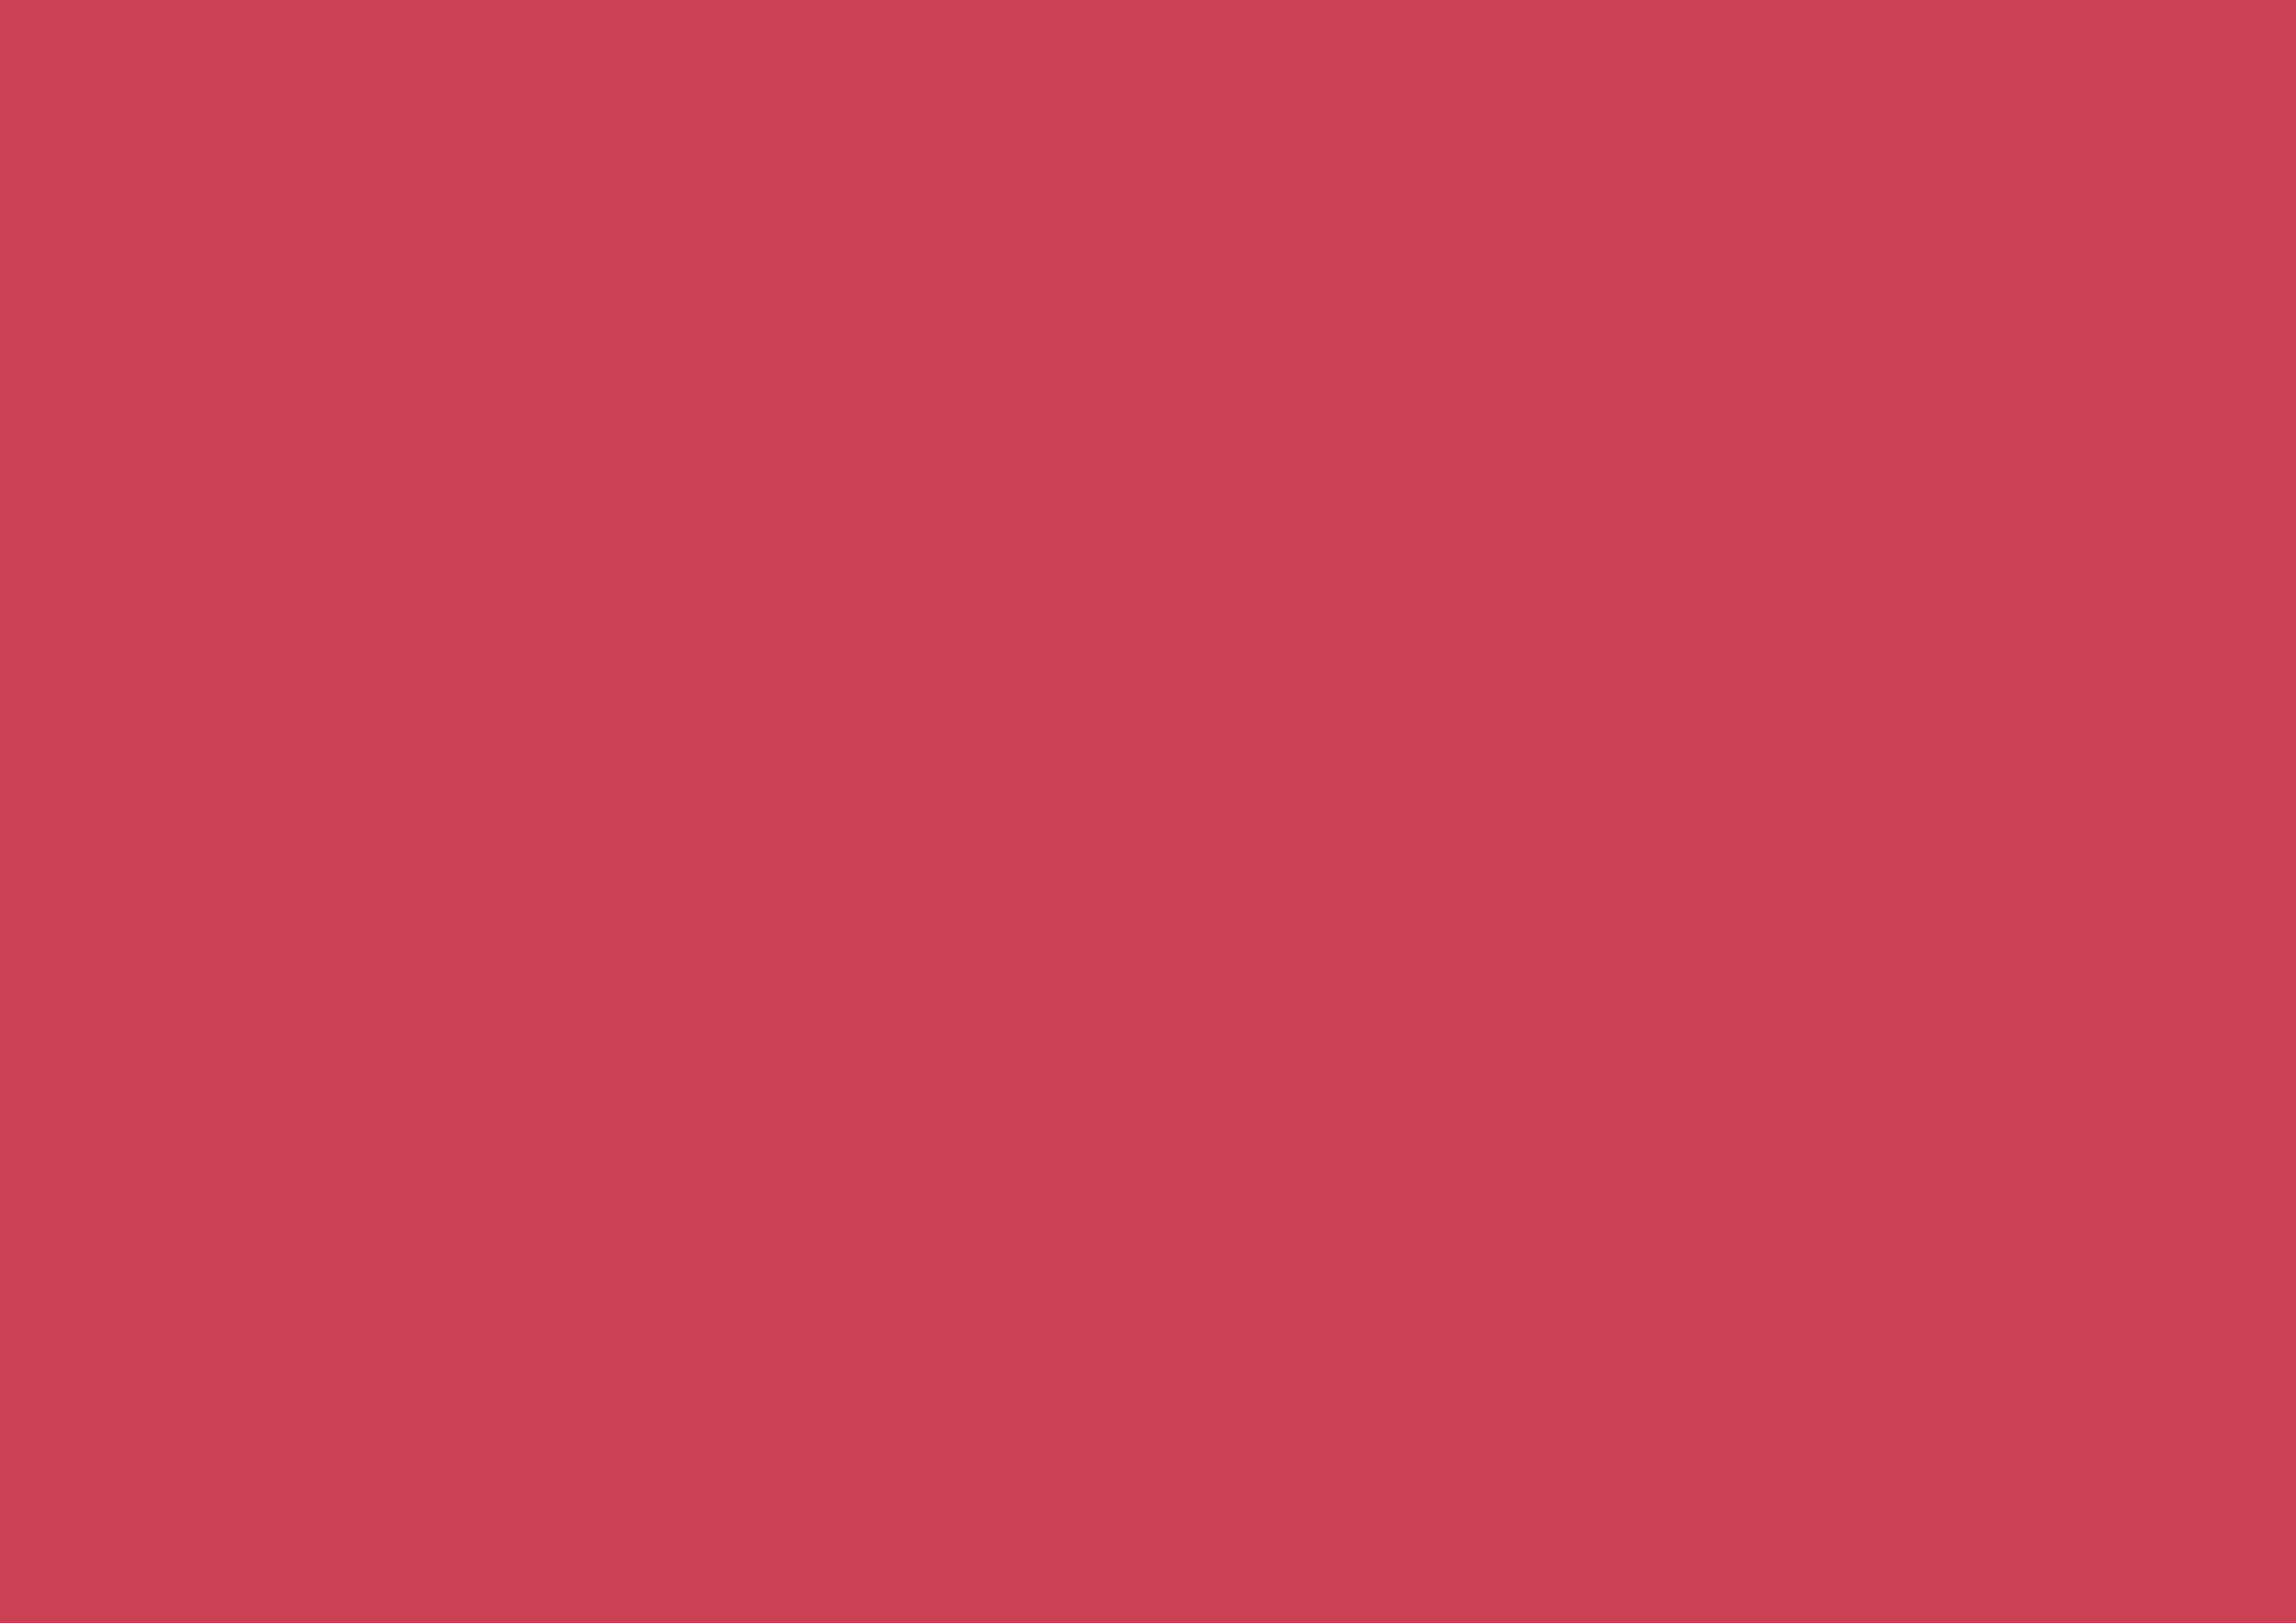 3508x2480 Brick Red Solid Color Background